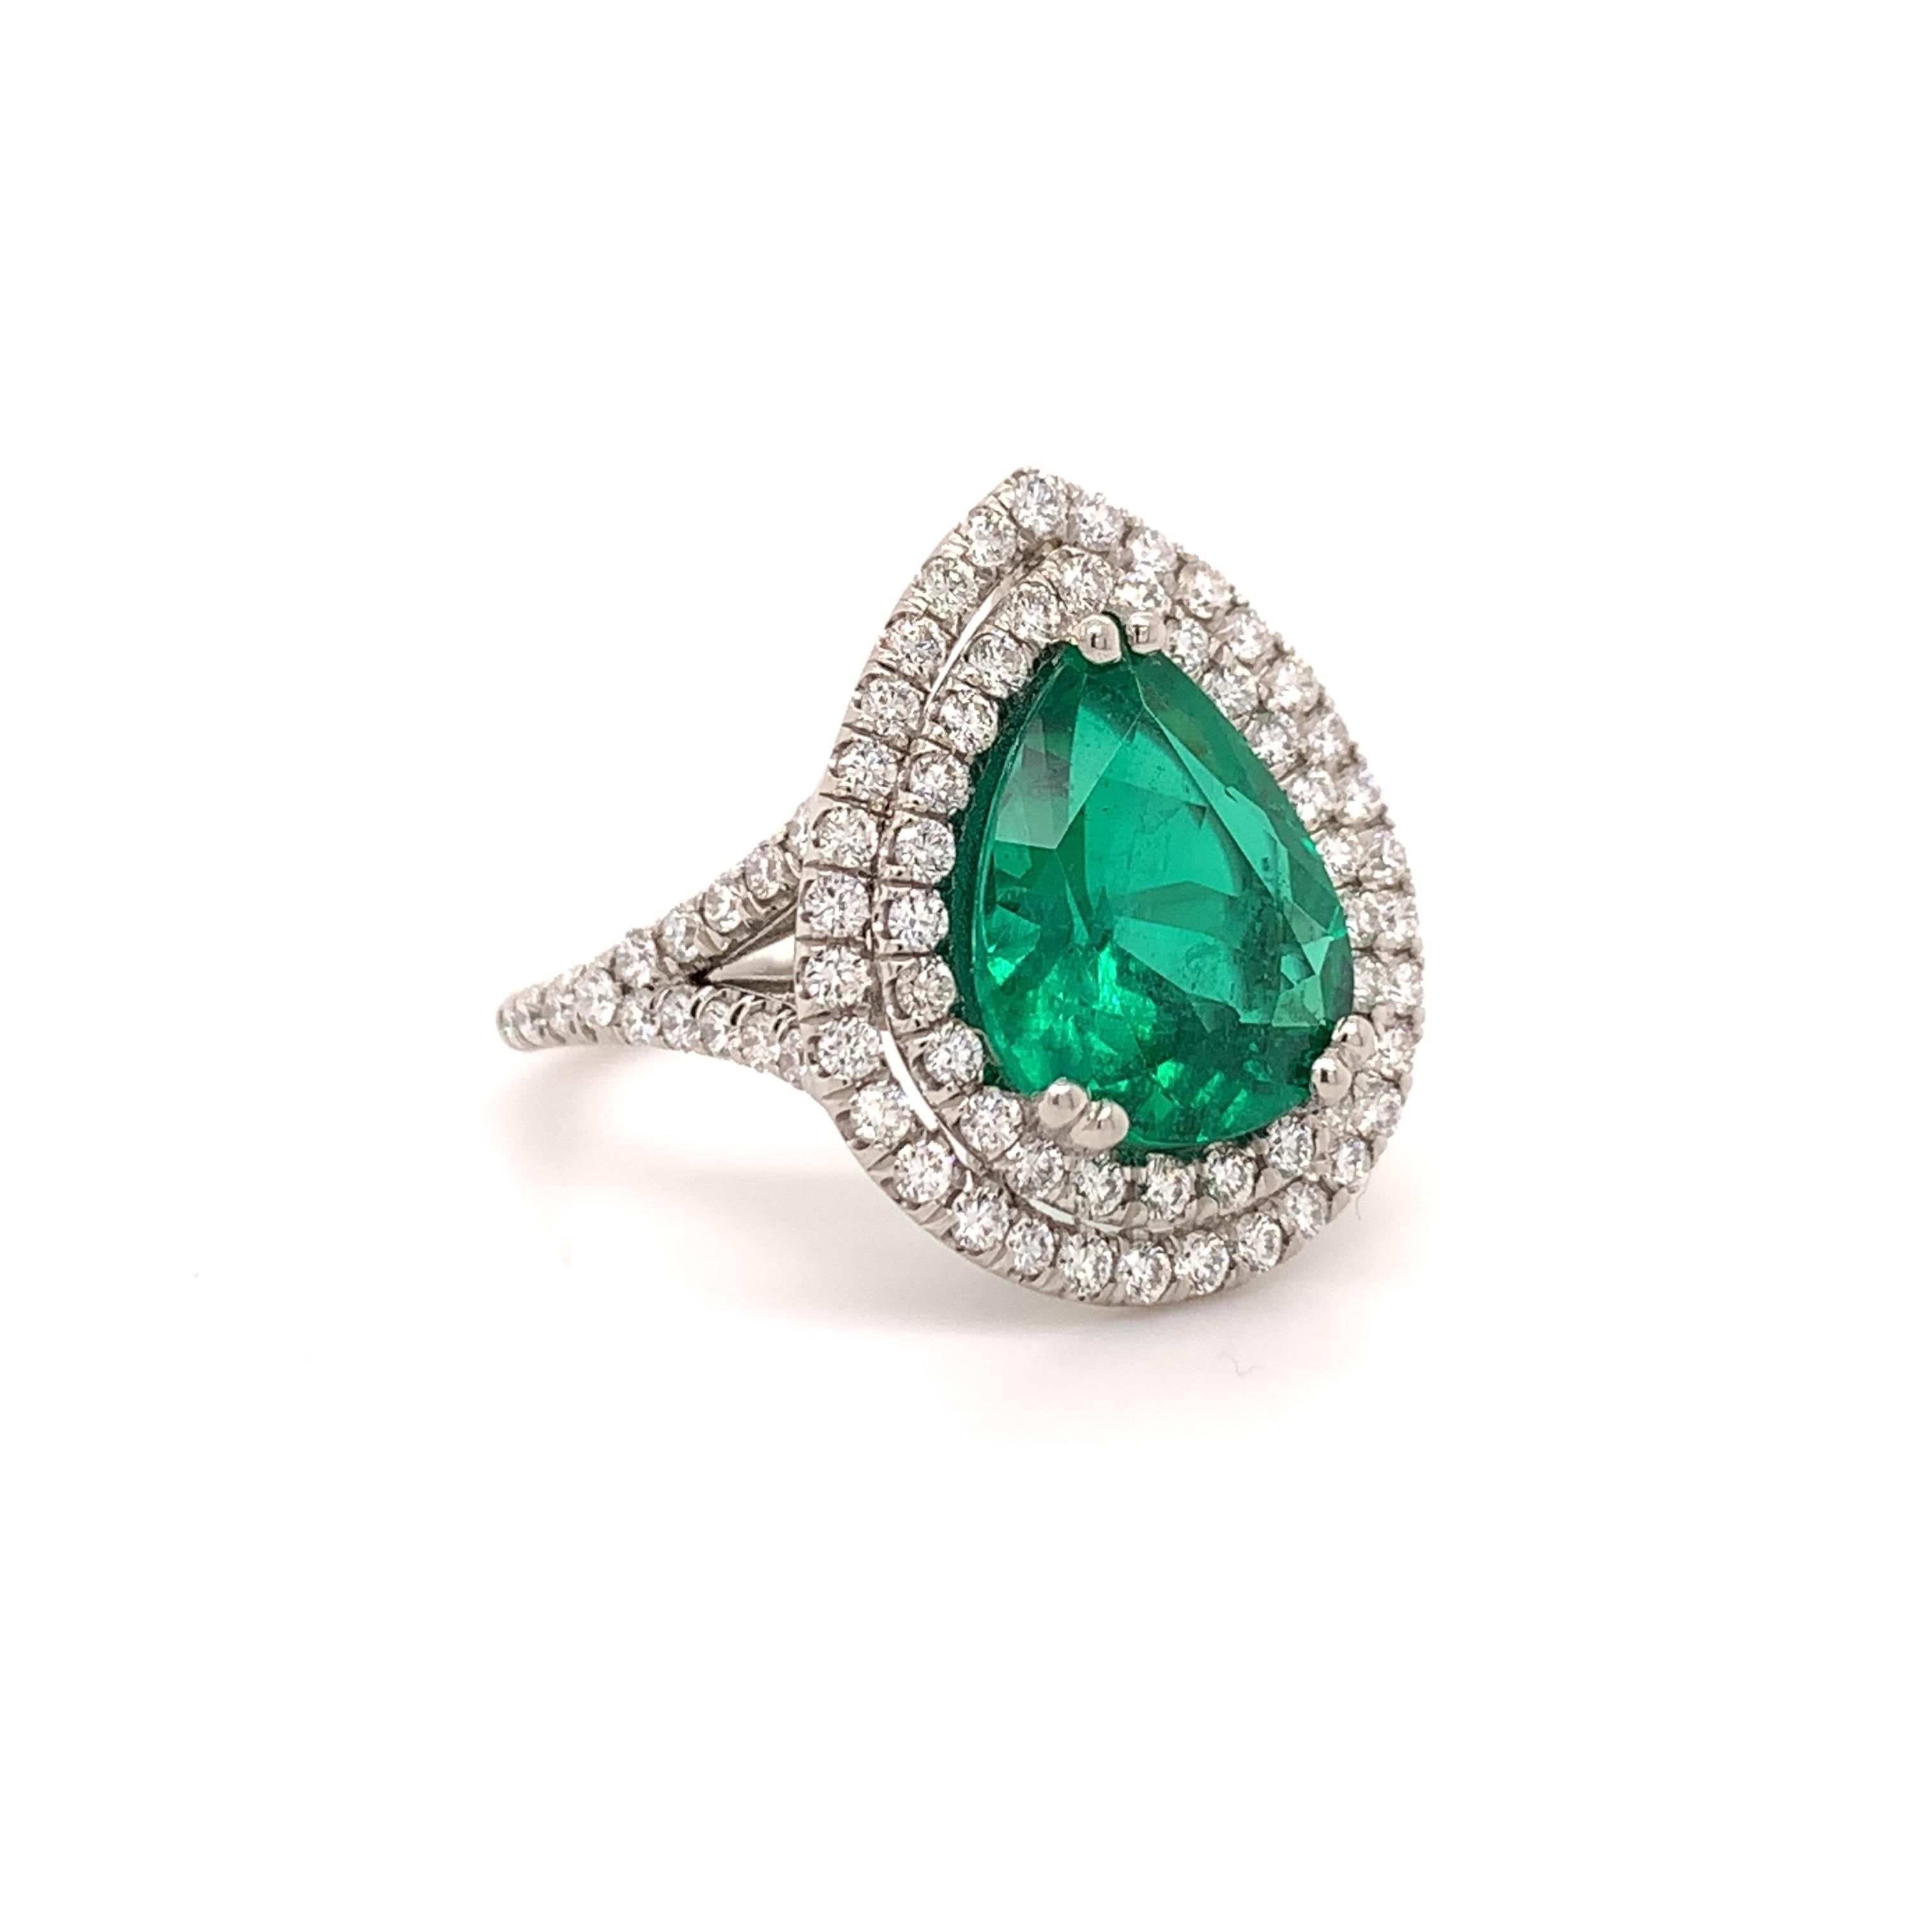 Glamorous emerald cocktail ring. High brilliance, intense green tone, pear faceted, transparent, Zambian origin, natural 3.37 carats emerald encased in an open mount with six bead prongs, accented with two round brilliant cut diamonds. Handcrafted